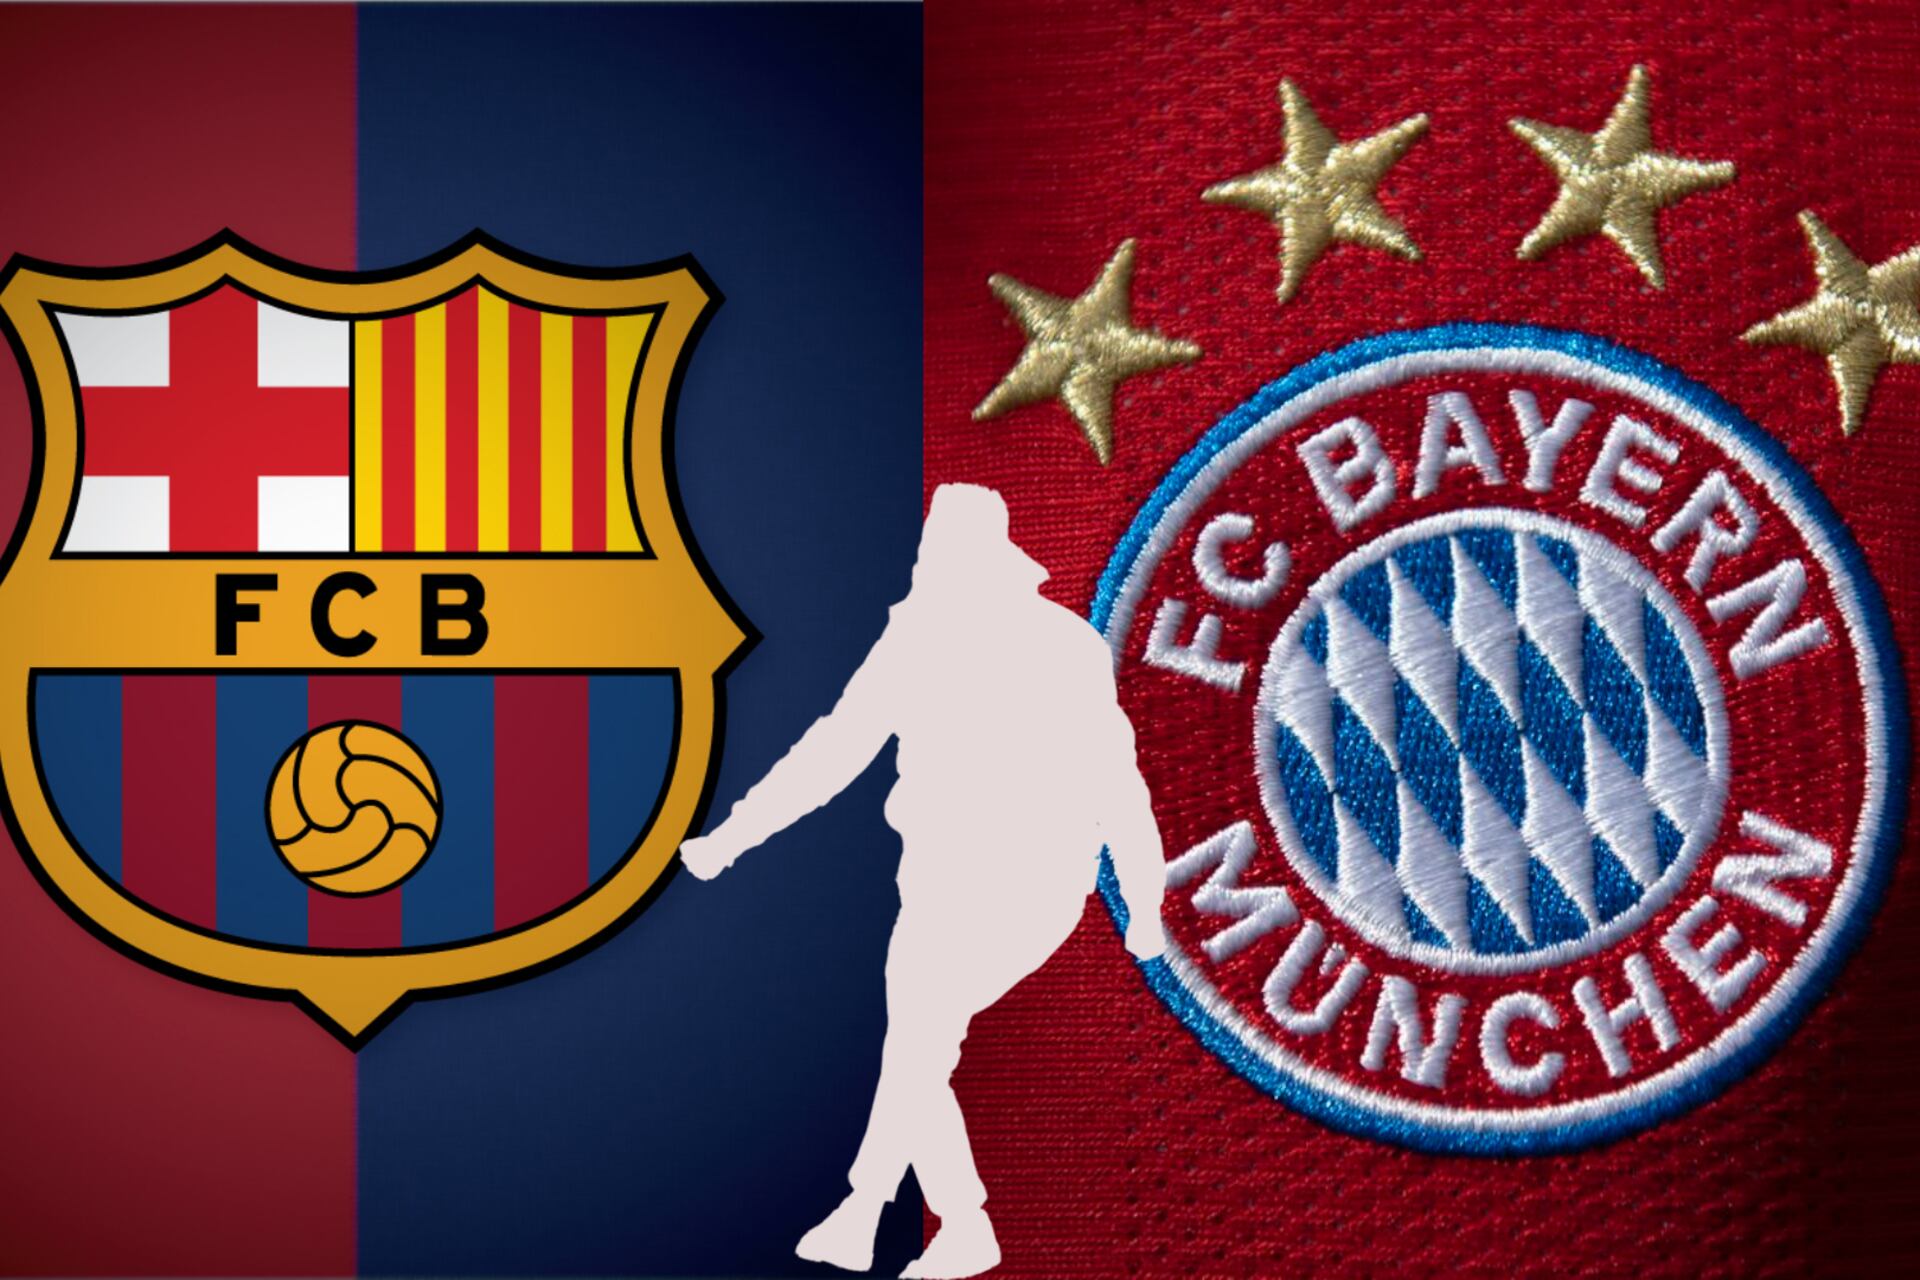 The manager FC Barcelona and Bayern Munich will try to appoint this summer